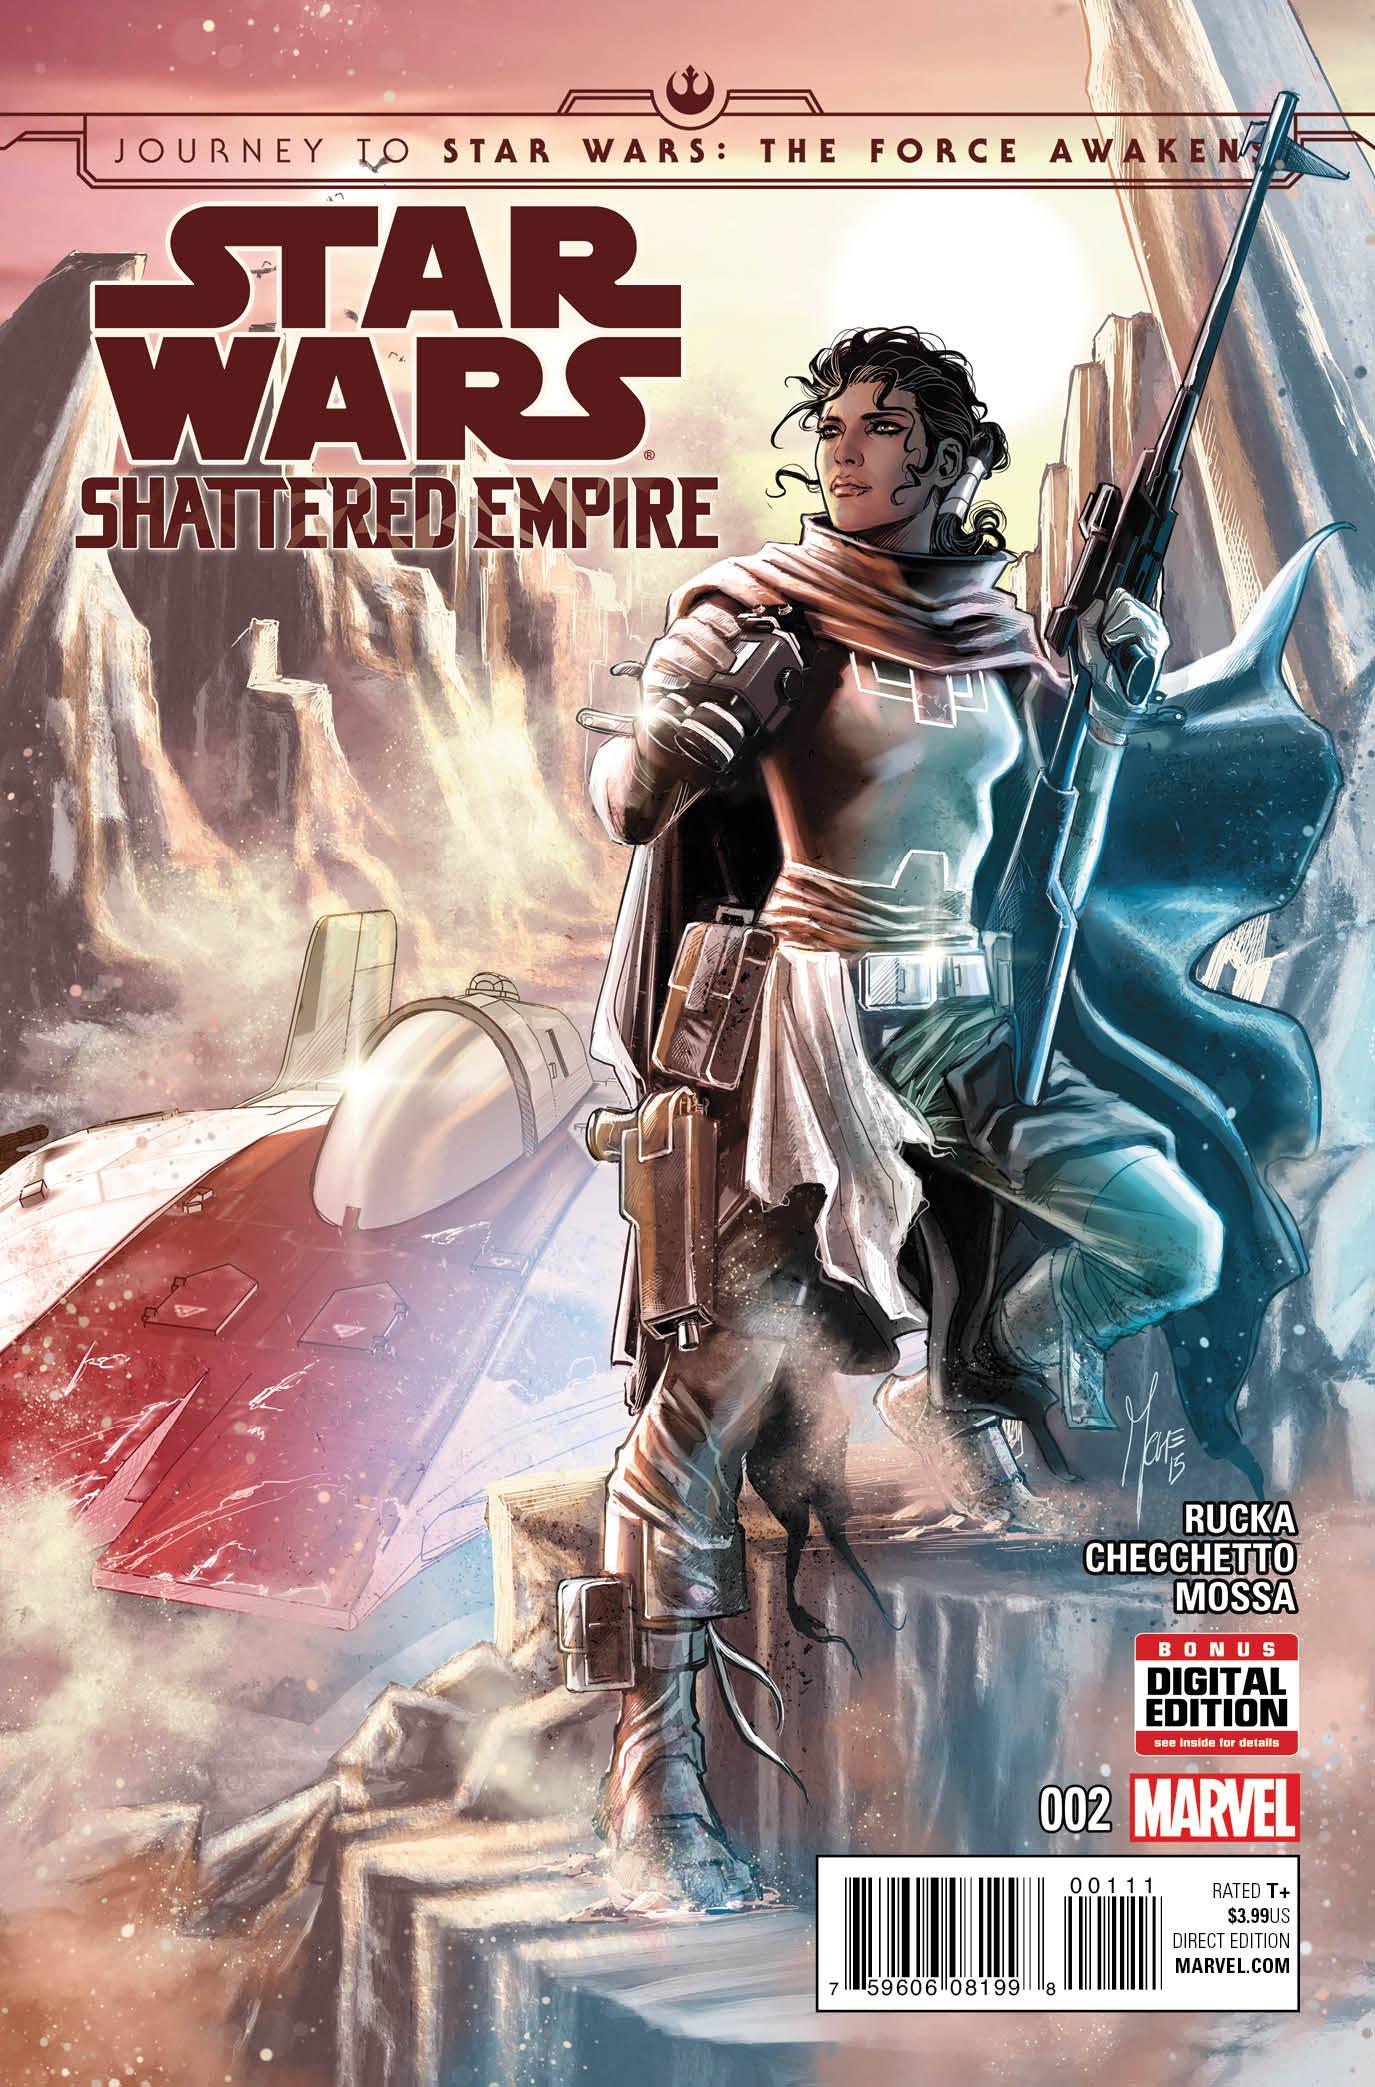 Journey to Star Wars: The Force Awakens - Shattered Empire Vol. 1 #2